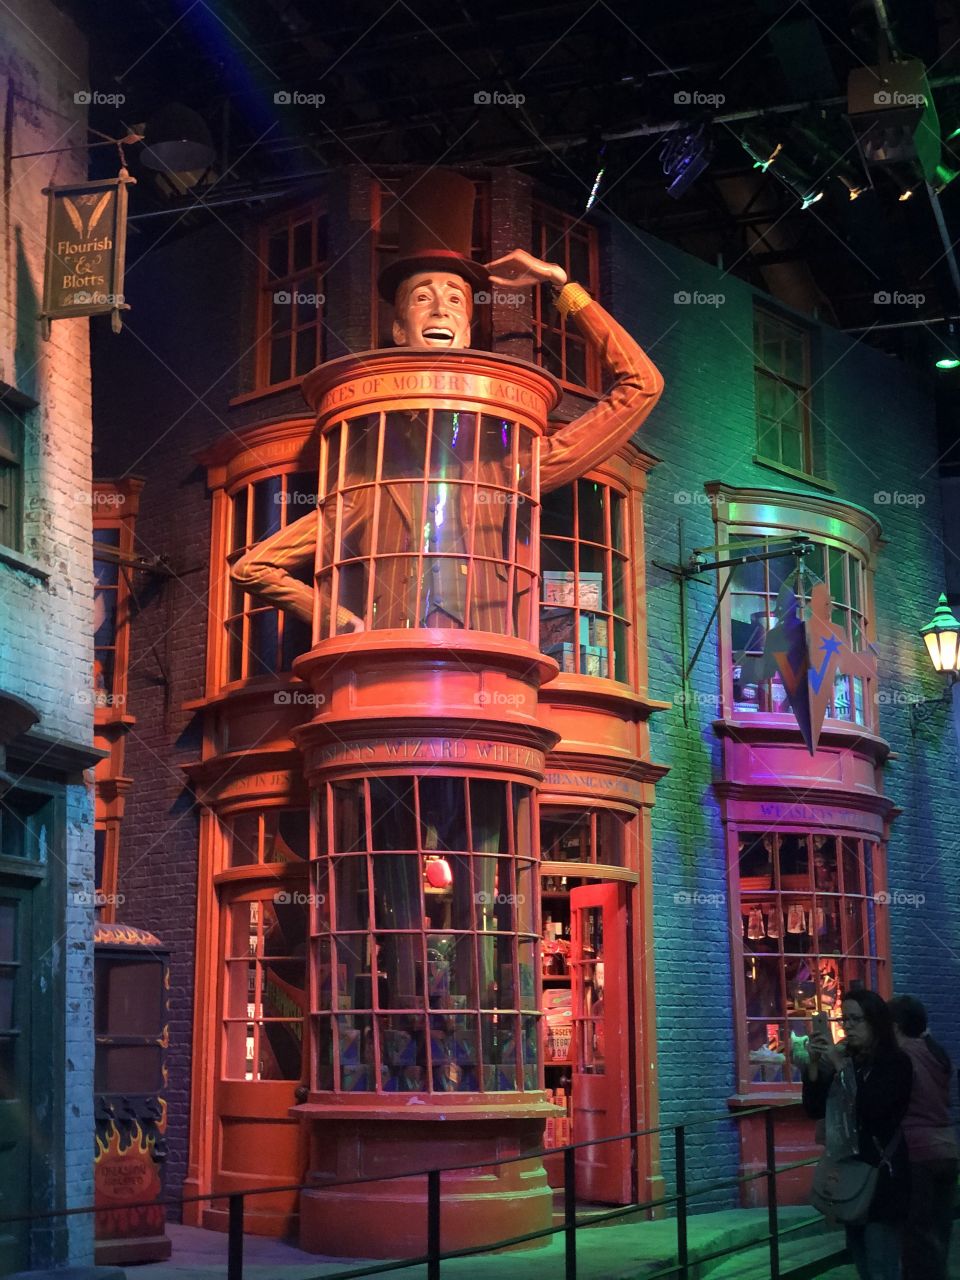 The sweet shop at Harry potter